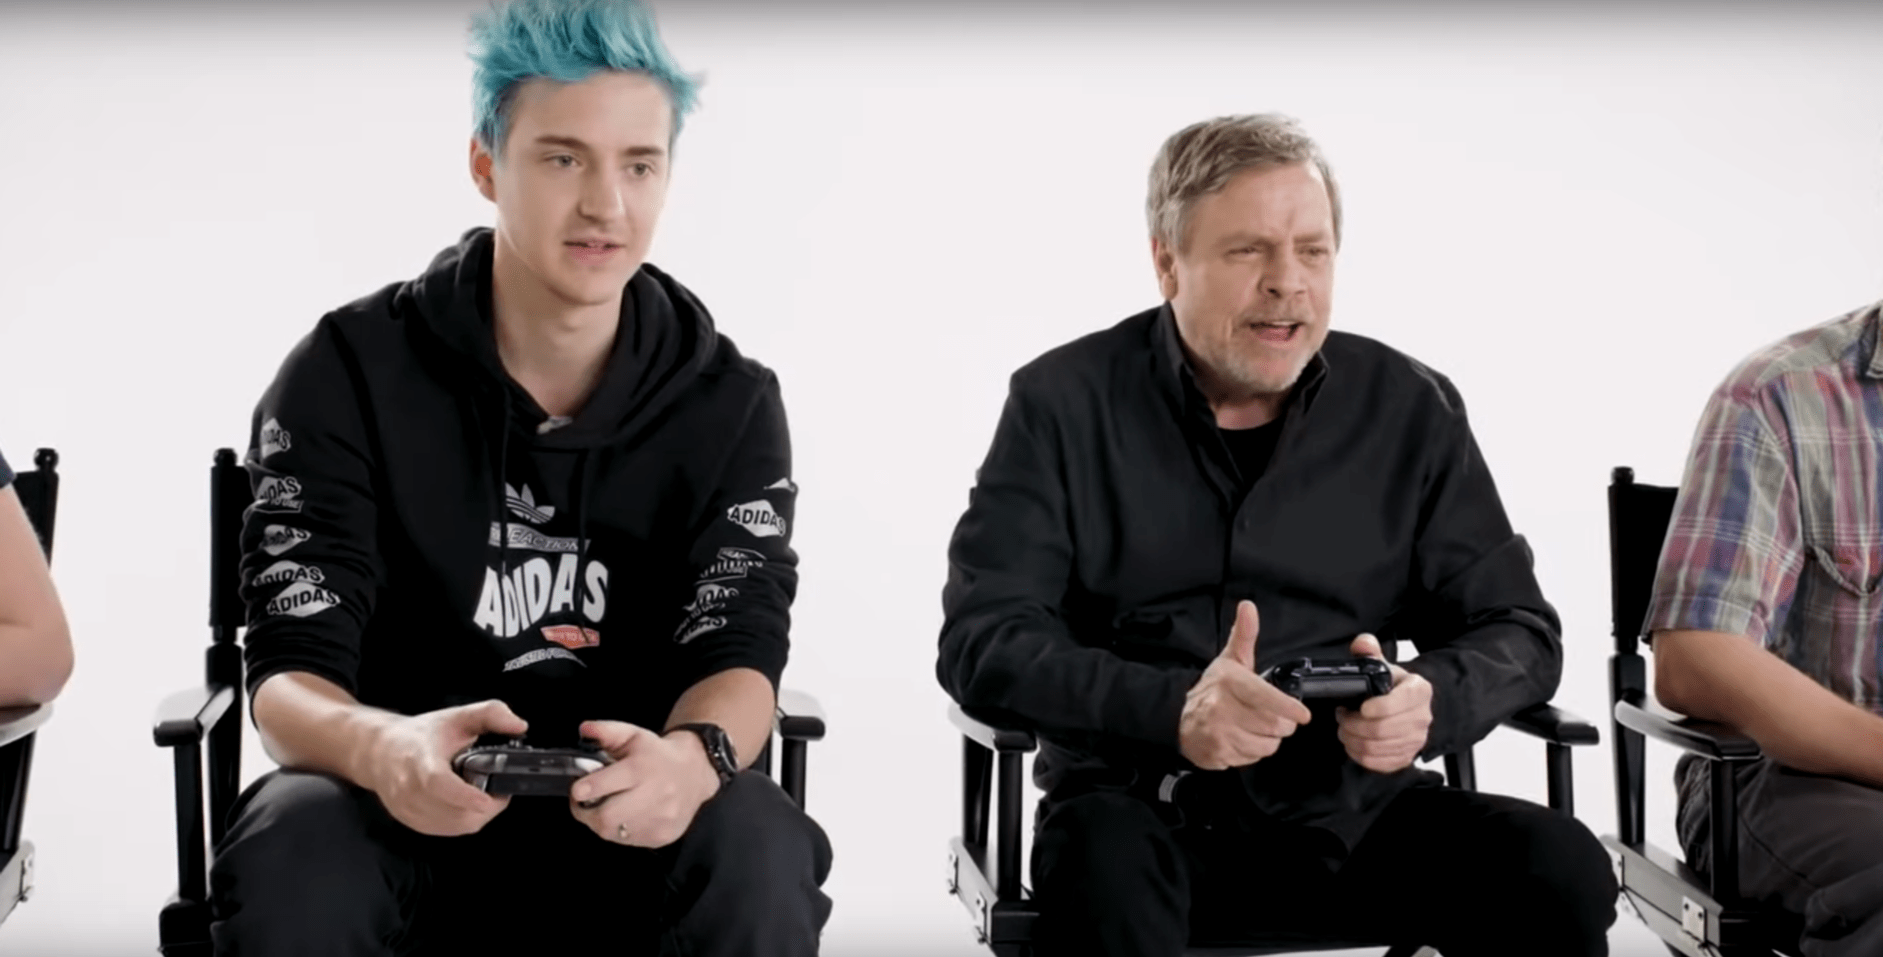 Ninja And Mark Hamill Play Fortnite Together While Chatting About Hamill’s Video Game Voice Acting And Charity Work